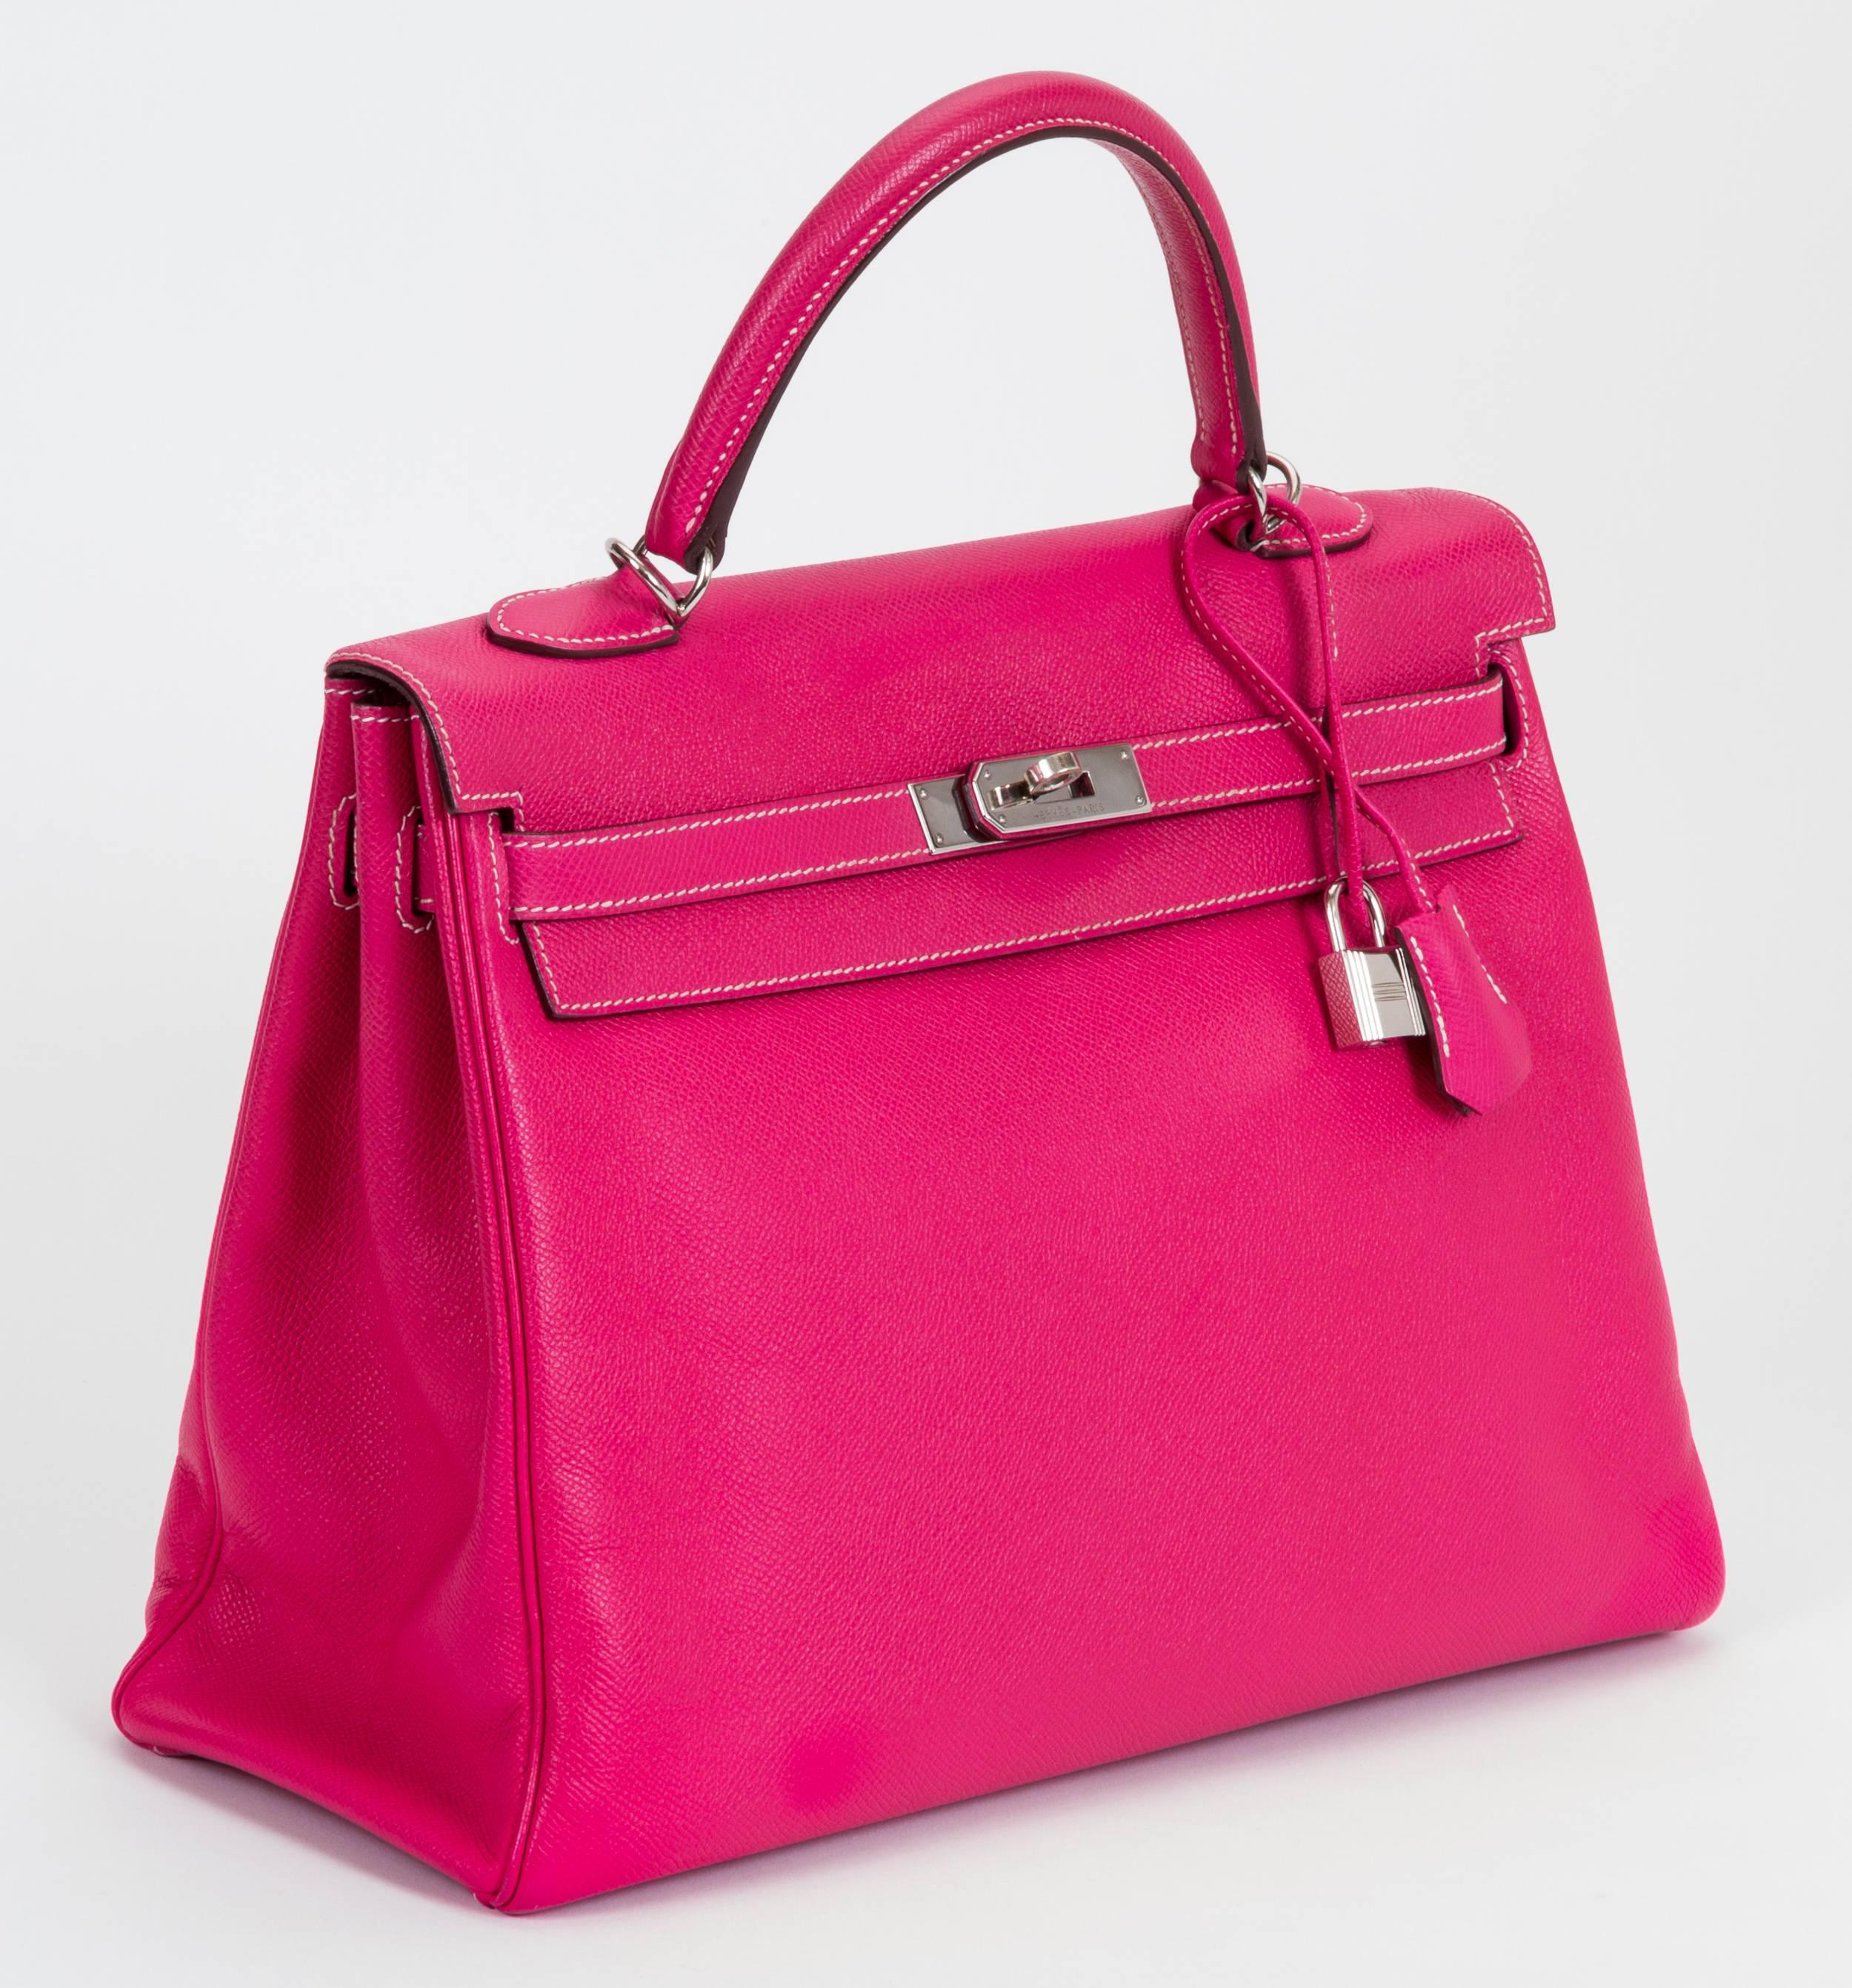 Hermès limited edition candy Kelly 35 cm, retourne bag in rose tyrien epsom leather exterior /tosca chèvre misore interior and palladium hardware. Handle drop, 3.5